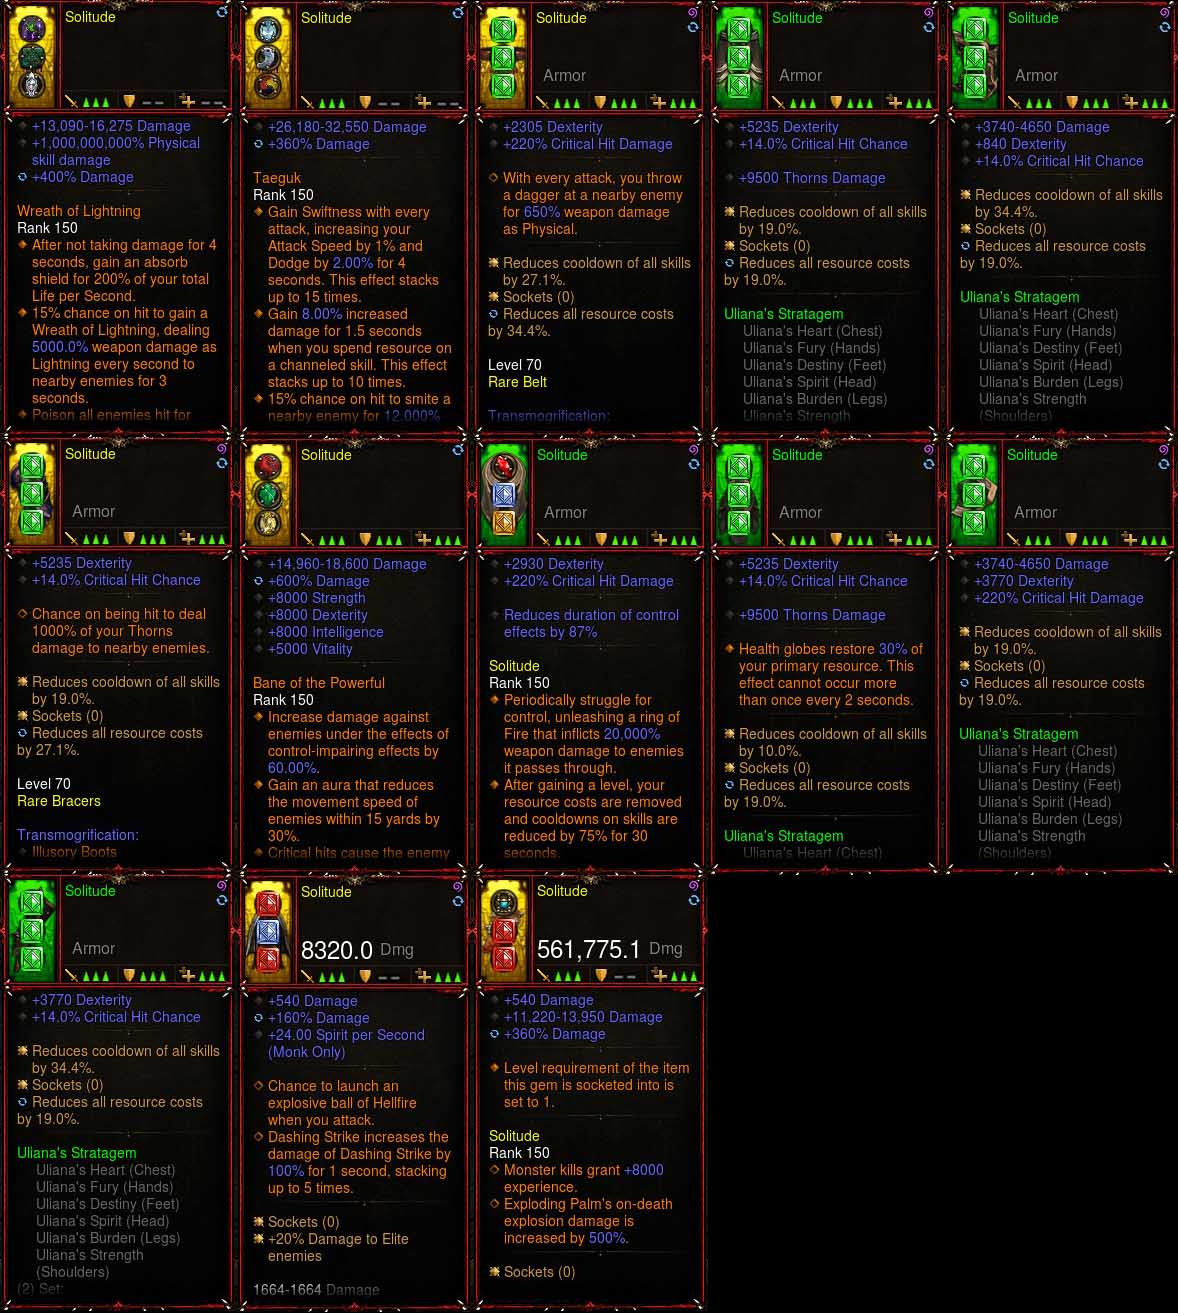 [Primal Ancient] [Quad DPS] [LIMITED] Diablo 3 IMv5 Ulania Monk Set Solitude W1 Diablo 3 Mods ROS Seasonal and Non Seasonal Save Mod - Modded Items and Gear - Hacks - Cheats - Trainers for Playstation 4 - Playstation 5 - Nintendo Switch - Xbox One